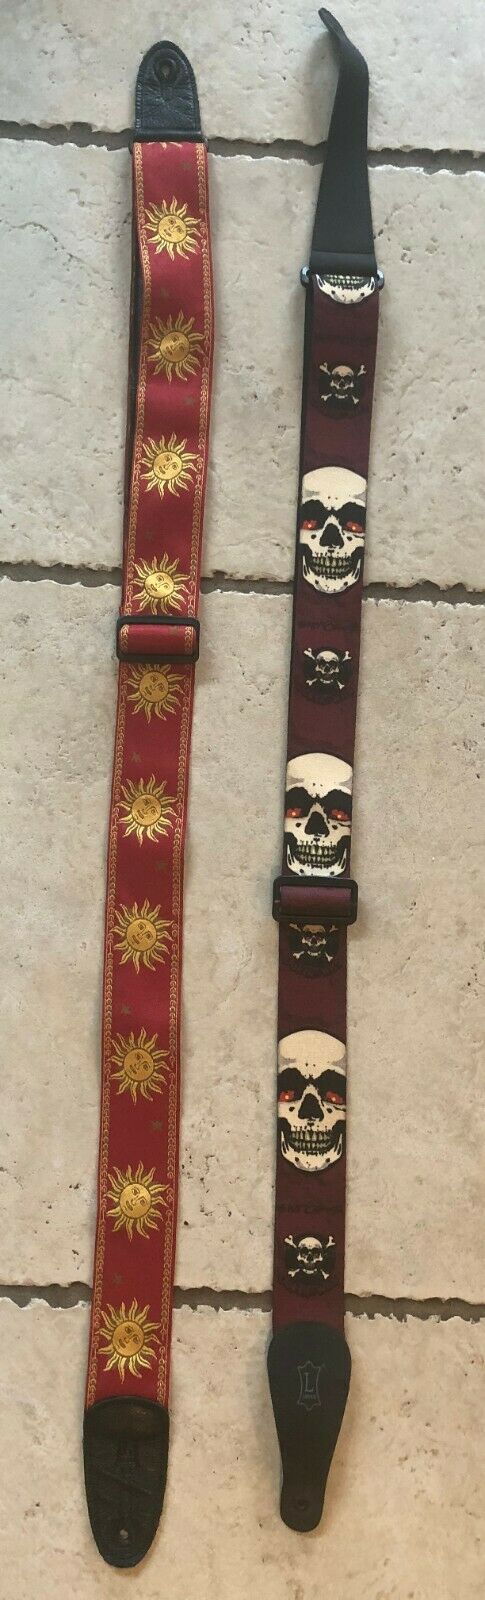 Pair, Two, 2, Levy's 2 " Guitar/bass Straps Multi Color Straps, Sun - Skull